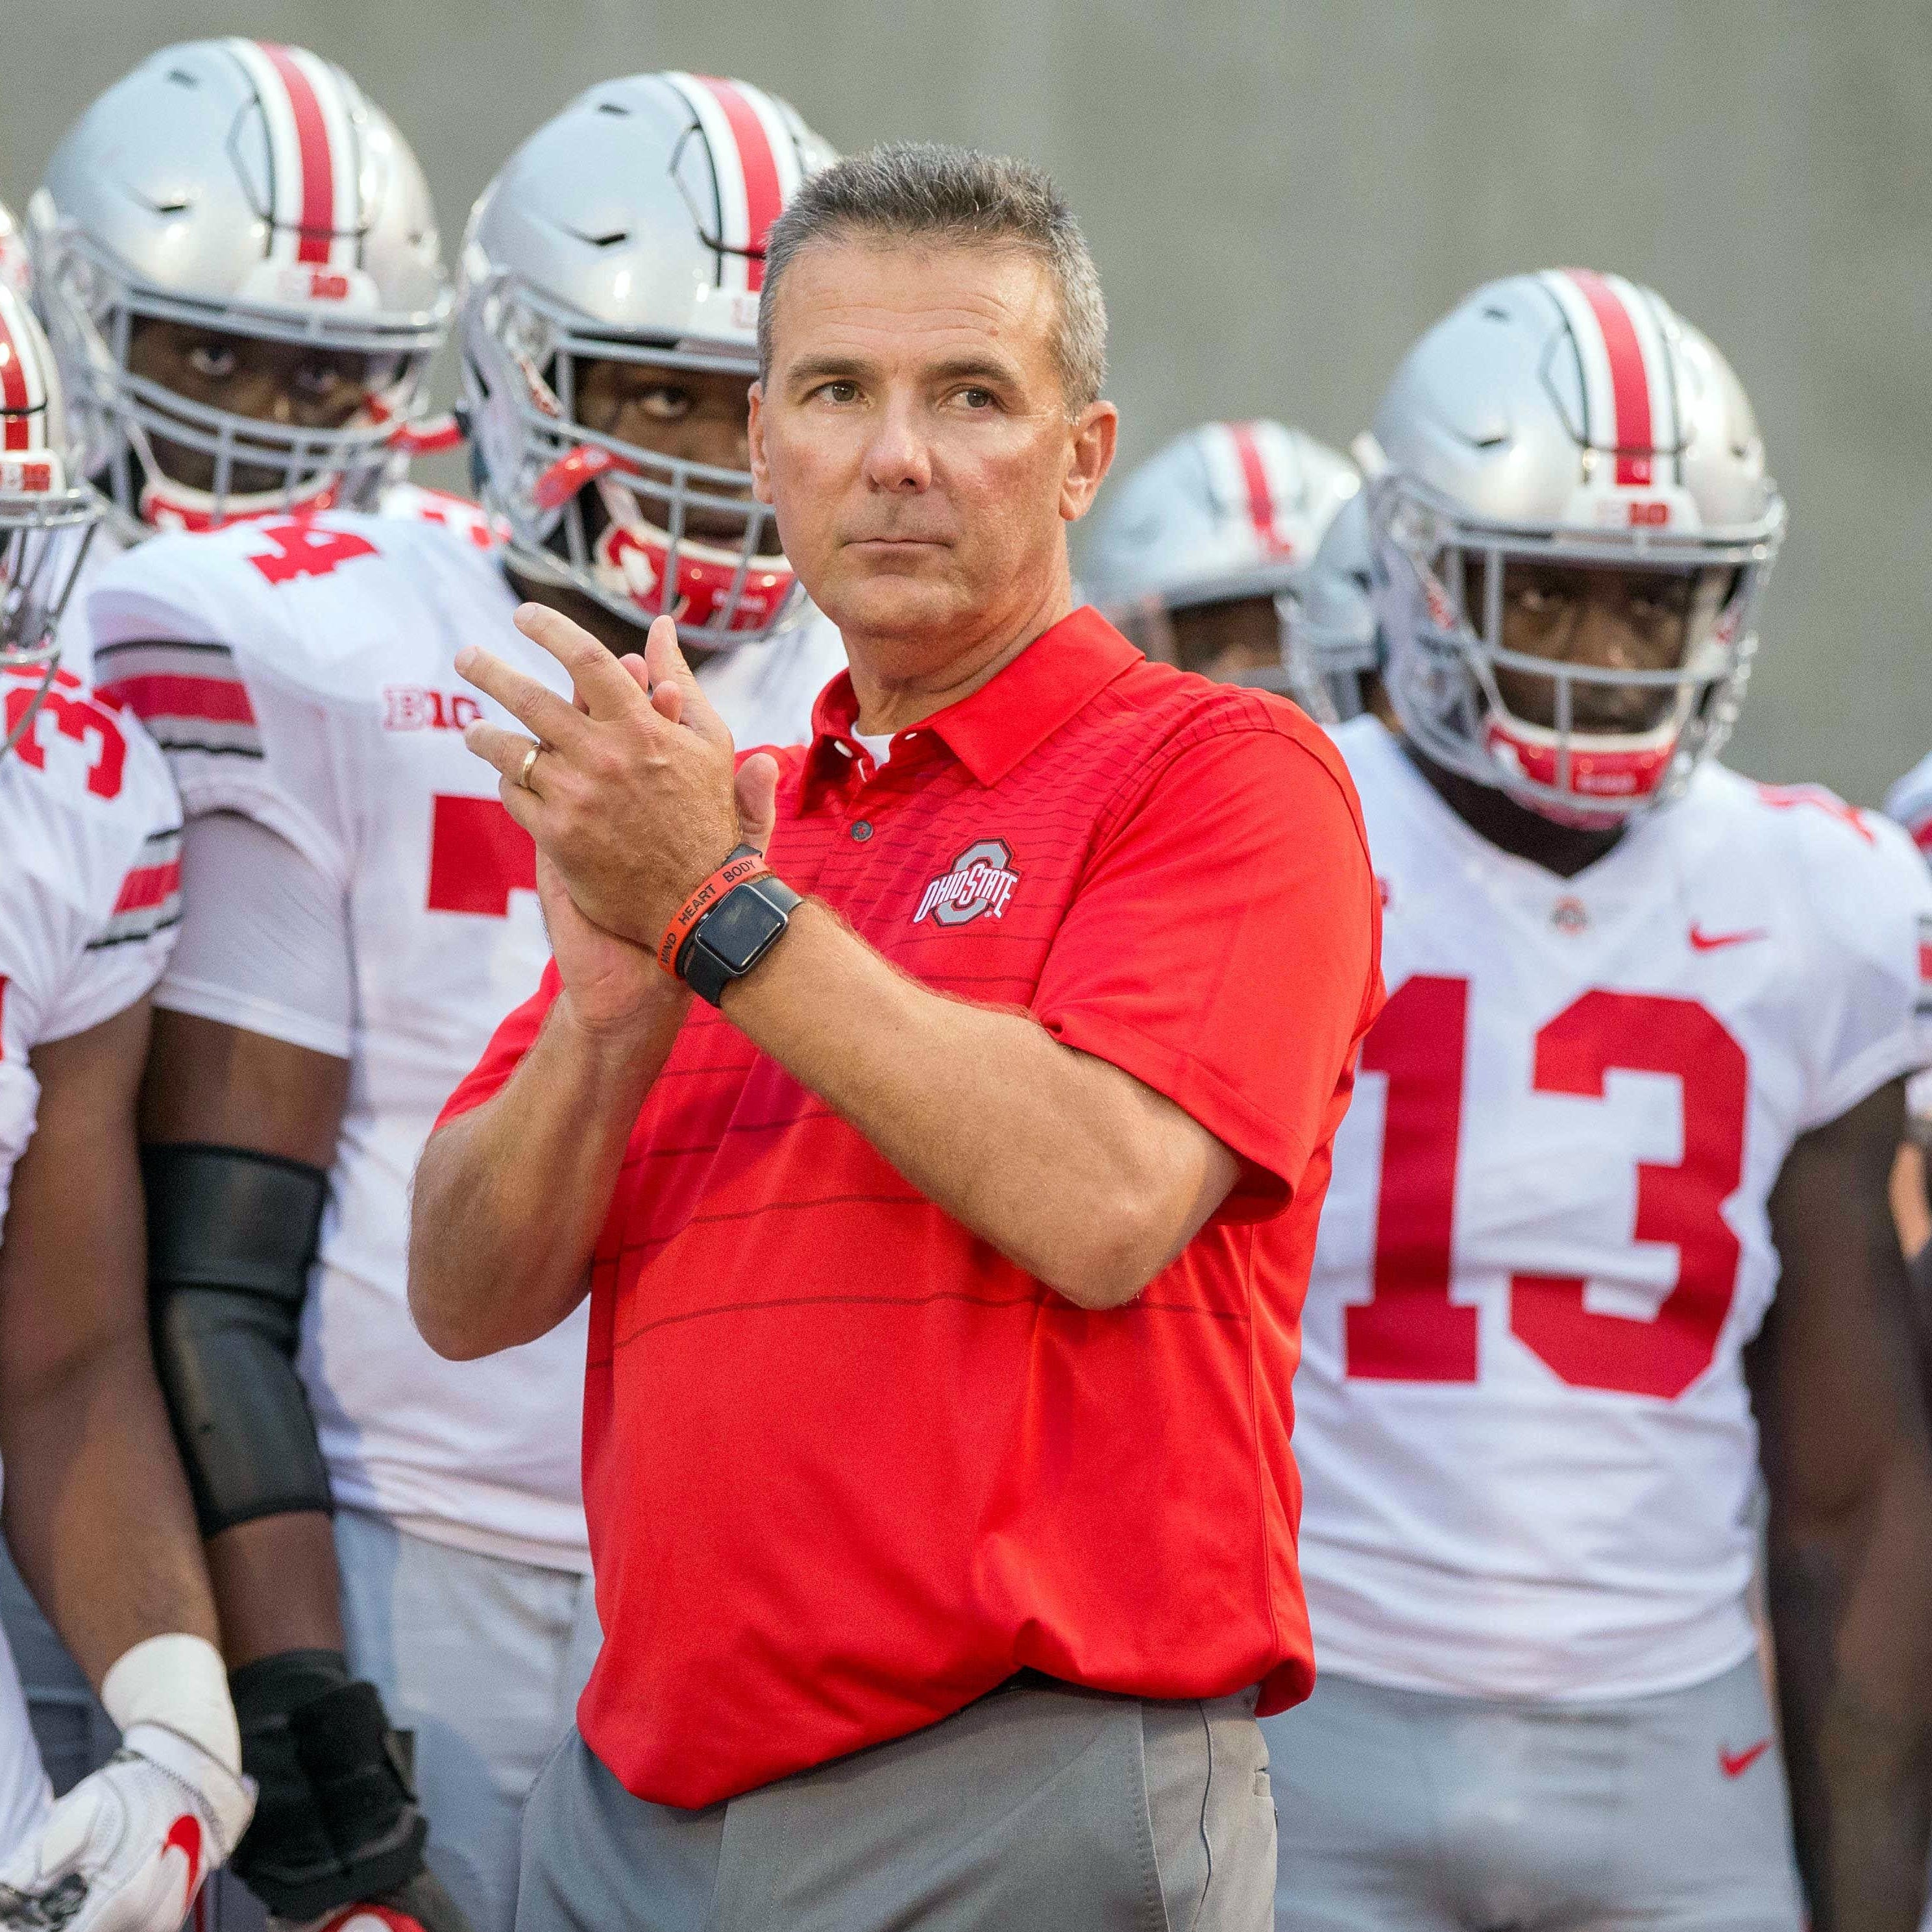 Ohio State coach Urban Meyer and his team prepares to take the field before their game against Indiana in 2017.